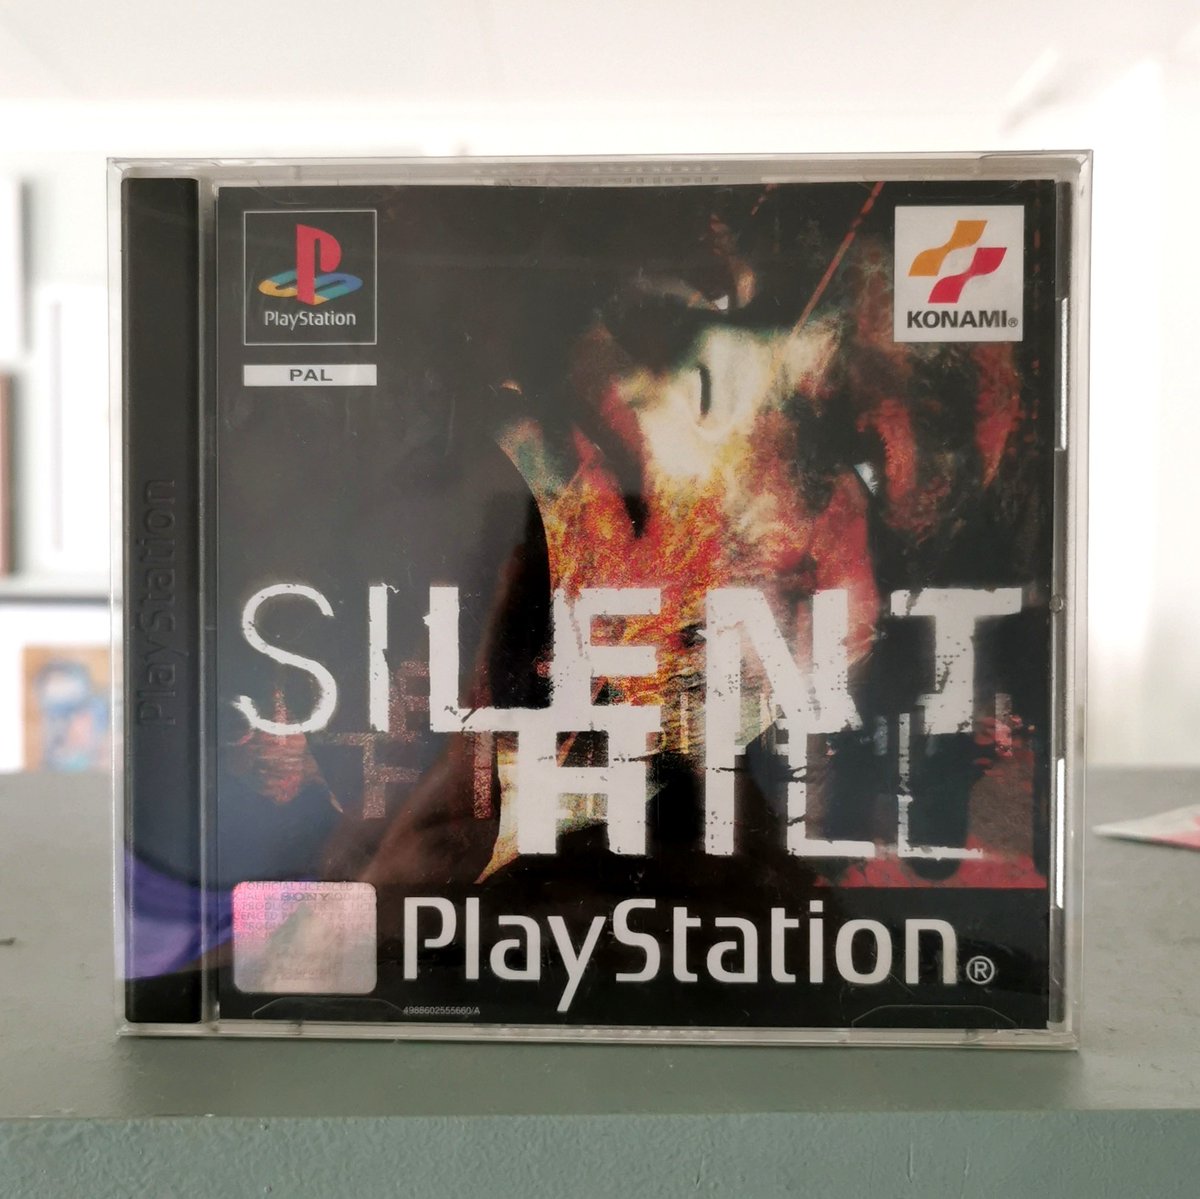 #PS1day Silent Hill expanded the console horror genre, and popularised psychological survival horror. I definitely recommend this to anyone looking for a PS1 game to play for #Spooktober! Do you have any Halloween recommendations?